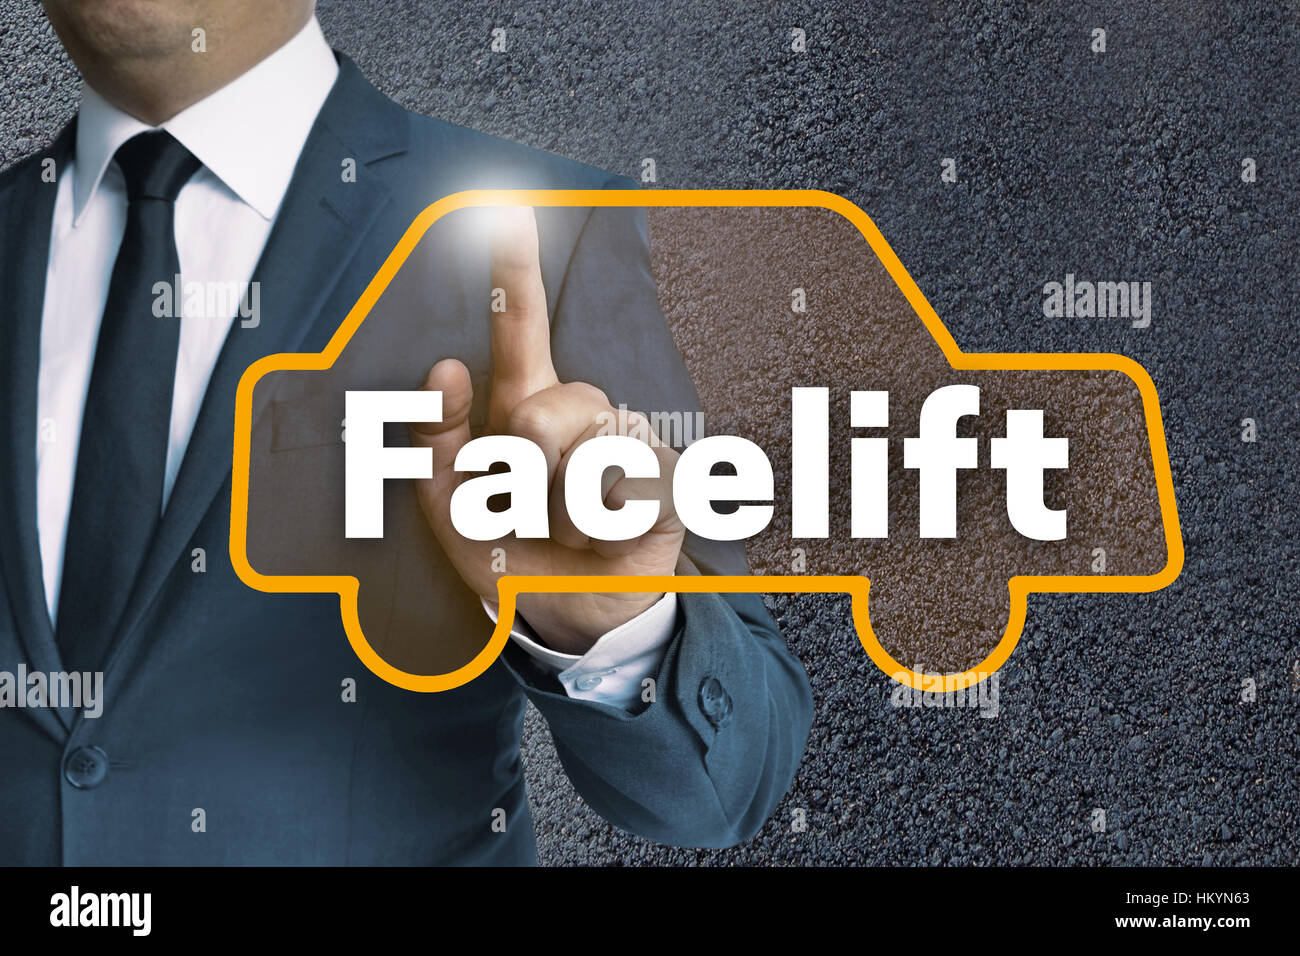 Facelift auto touchscreen is operated by man. Stock Photo